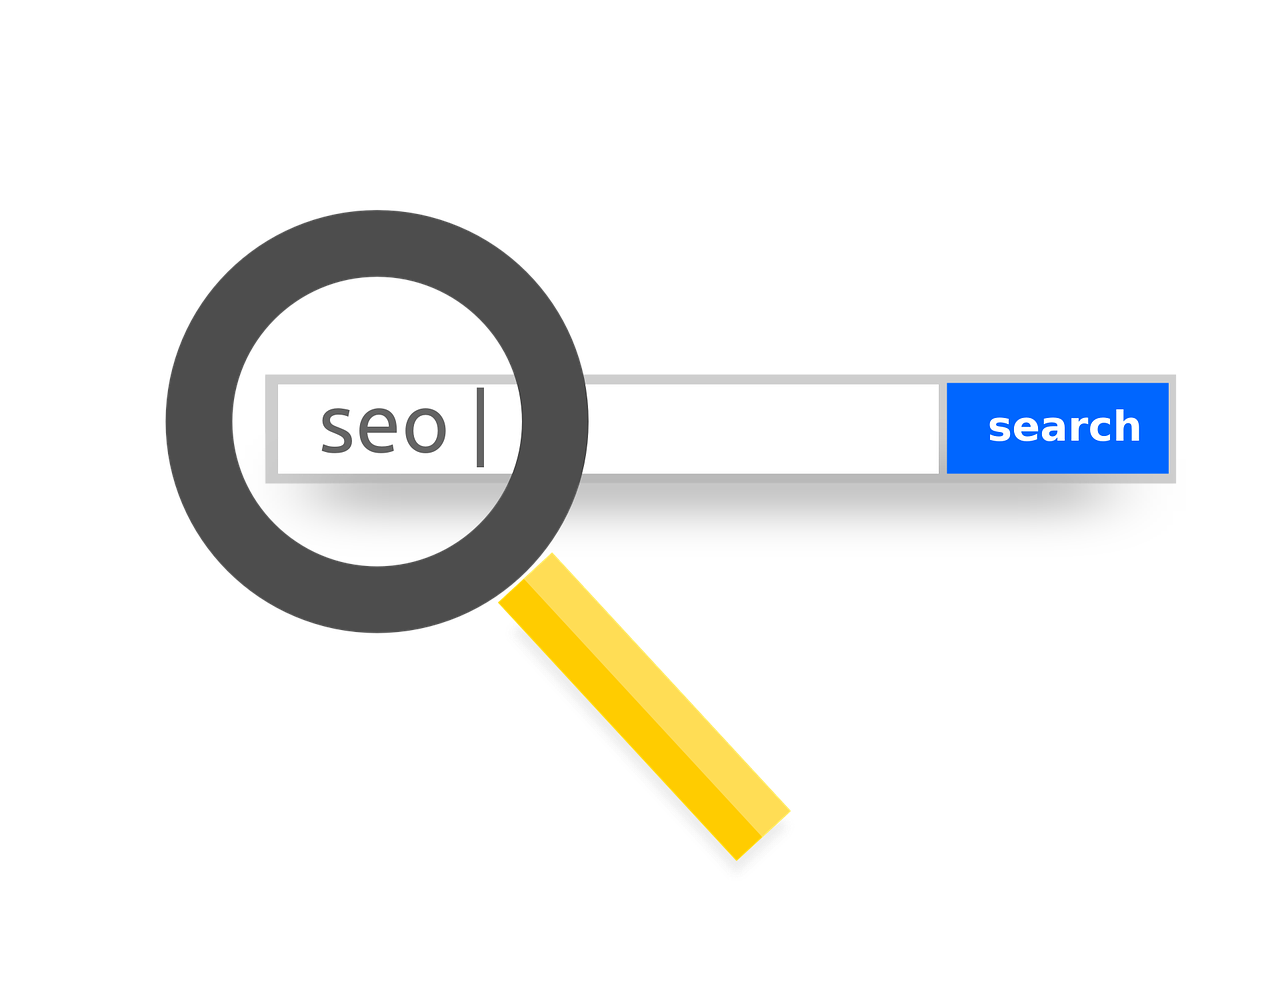 SEO (Search engine optimization) How to do it